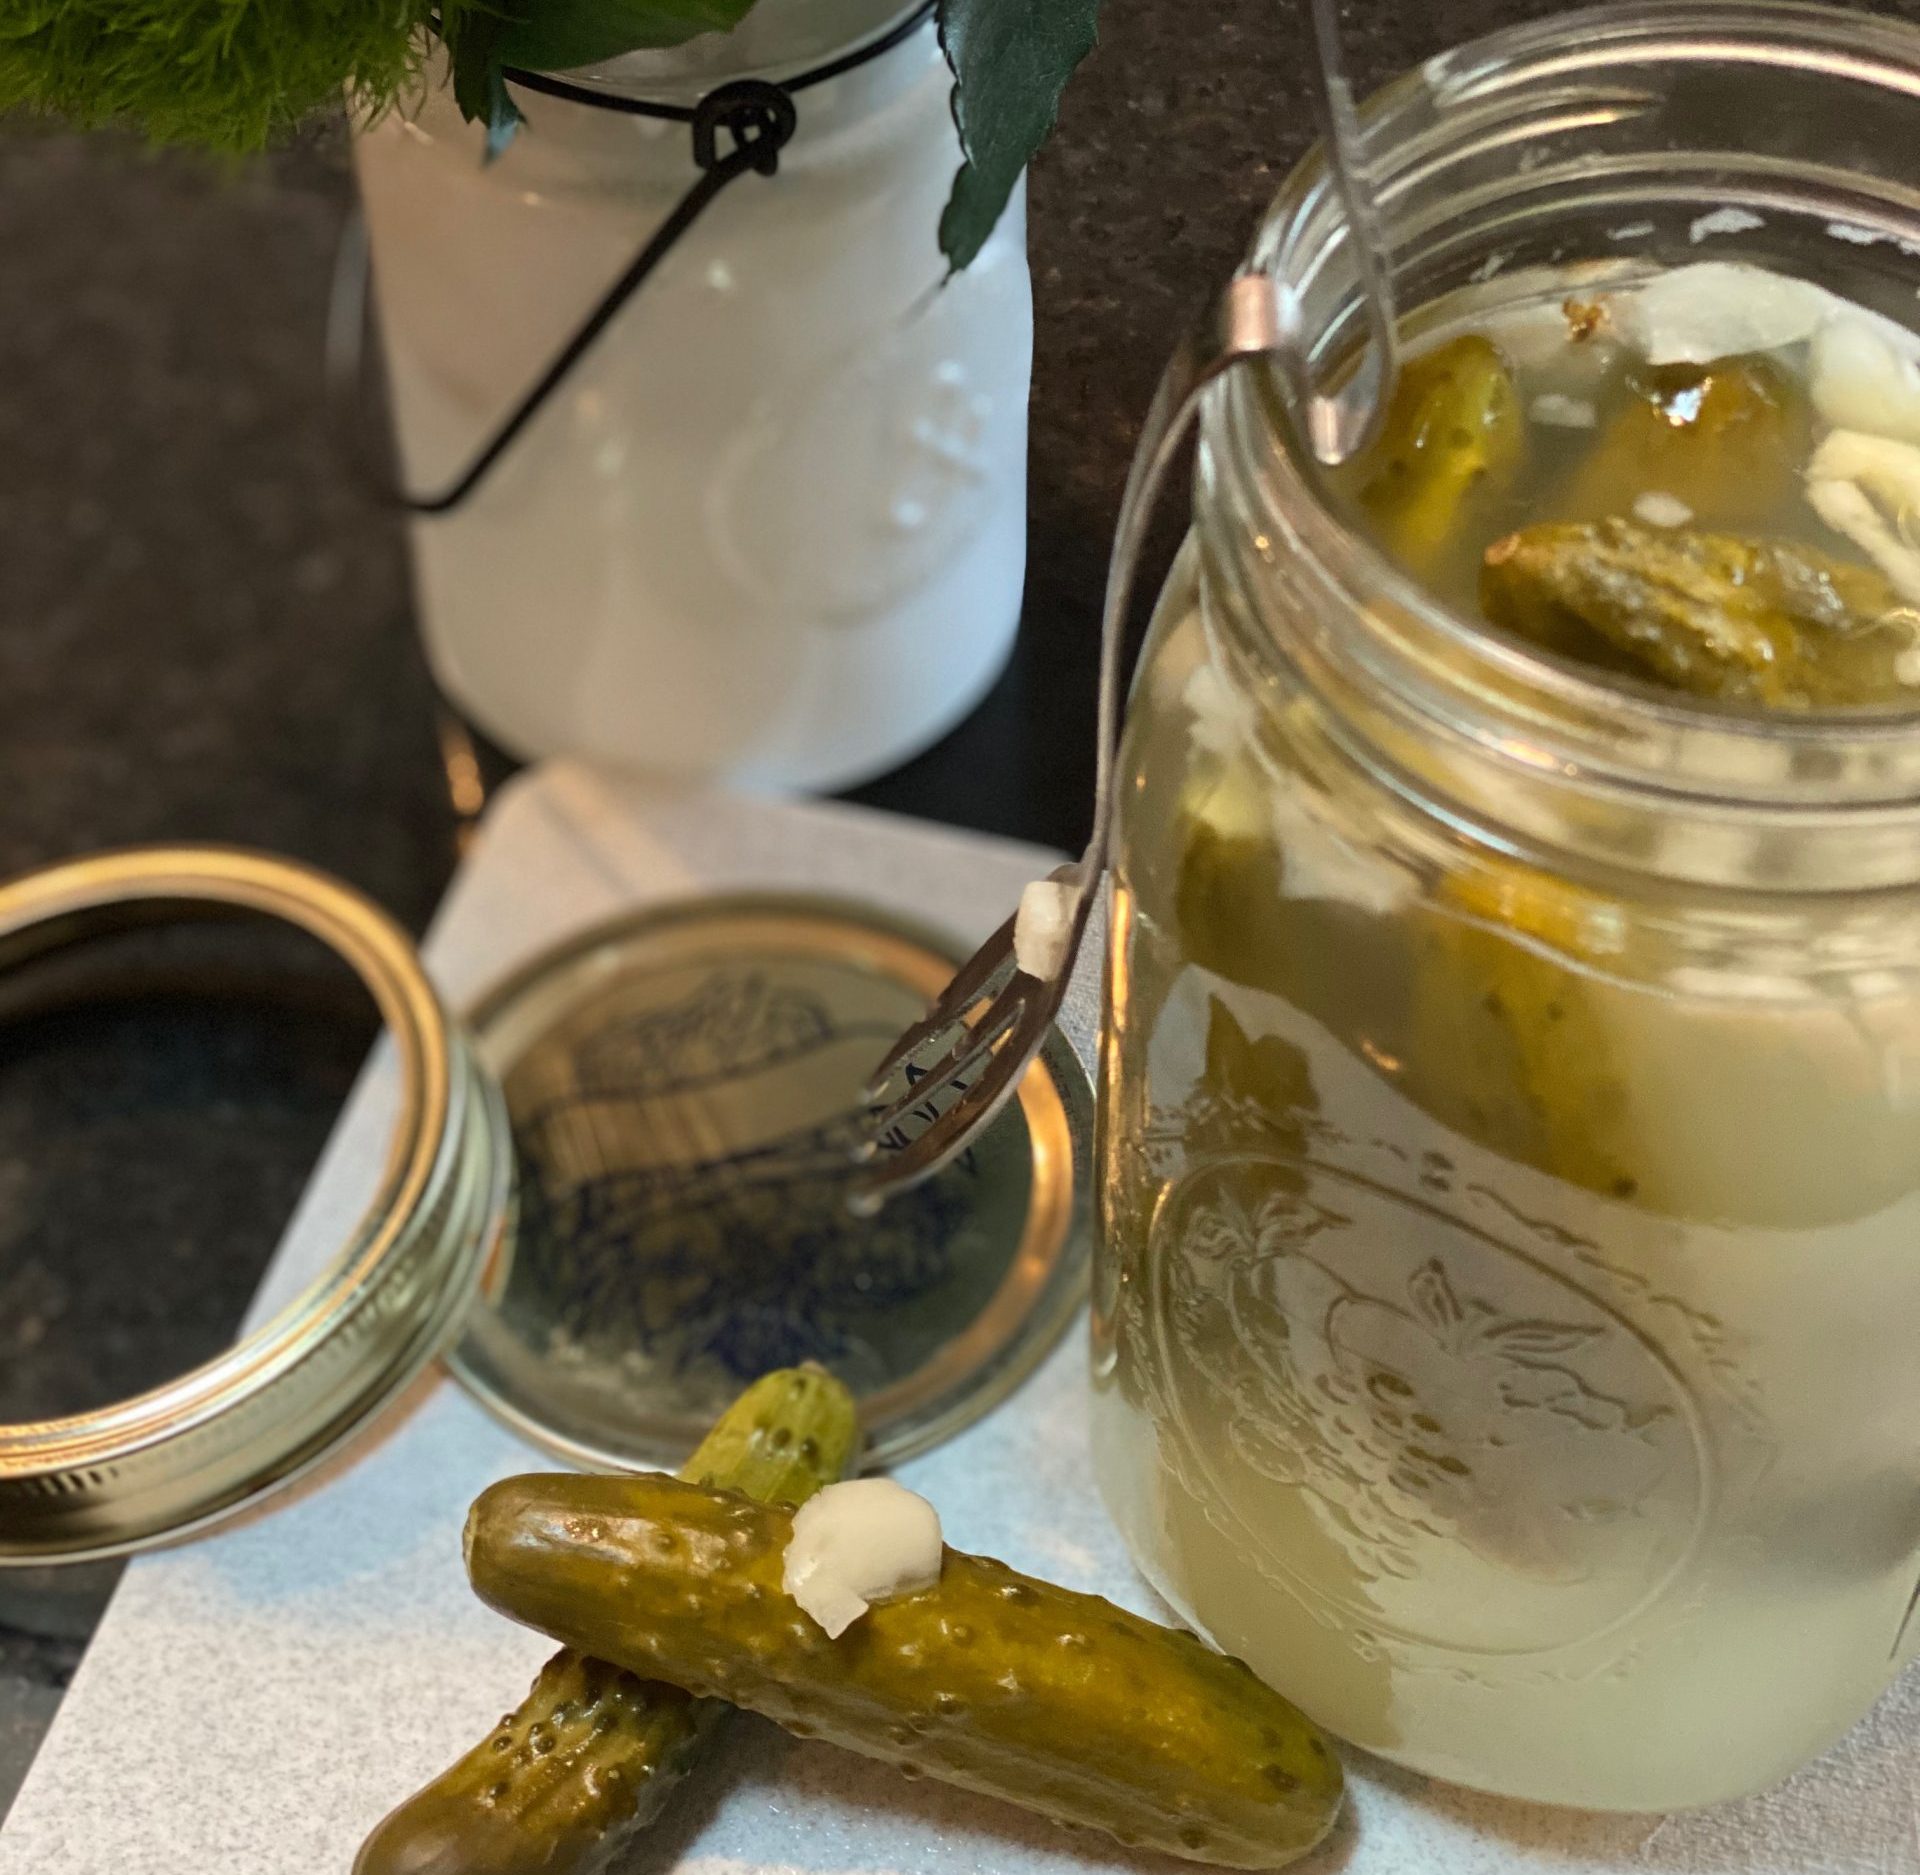 How to make home-fermented vegetables — 2 easy ways